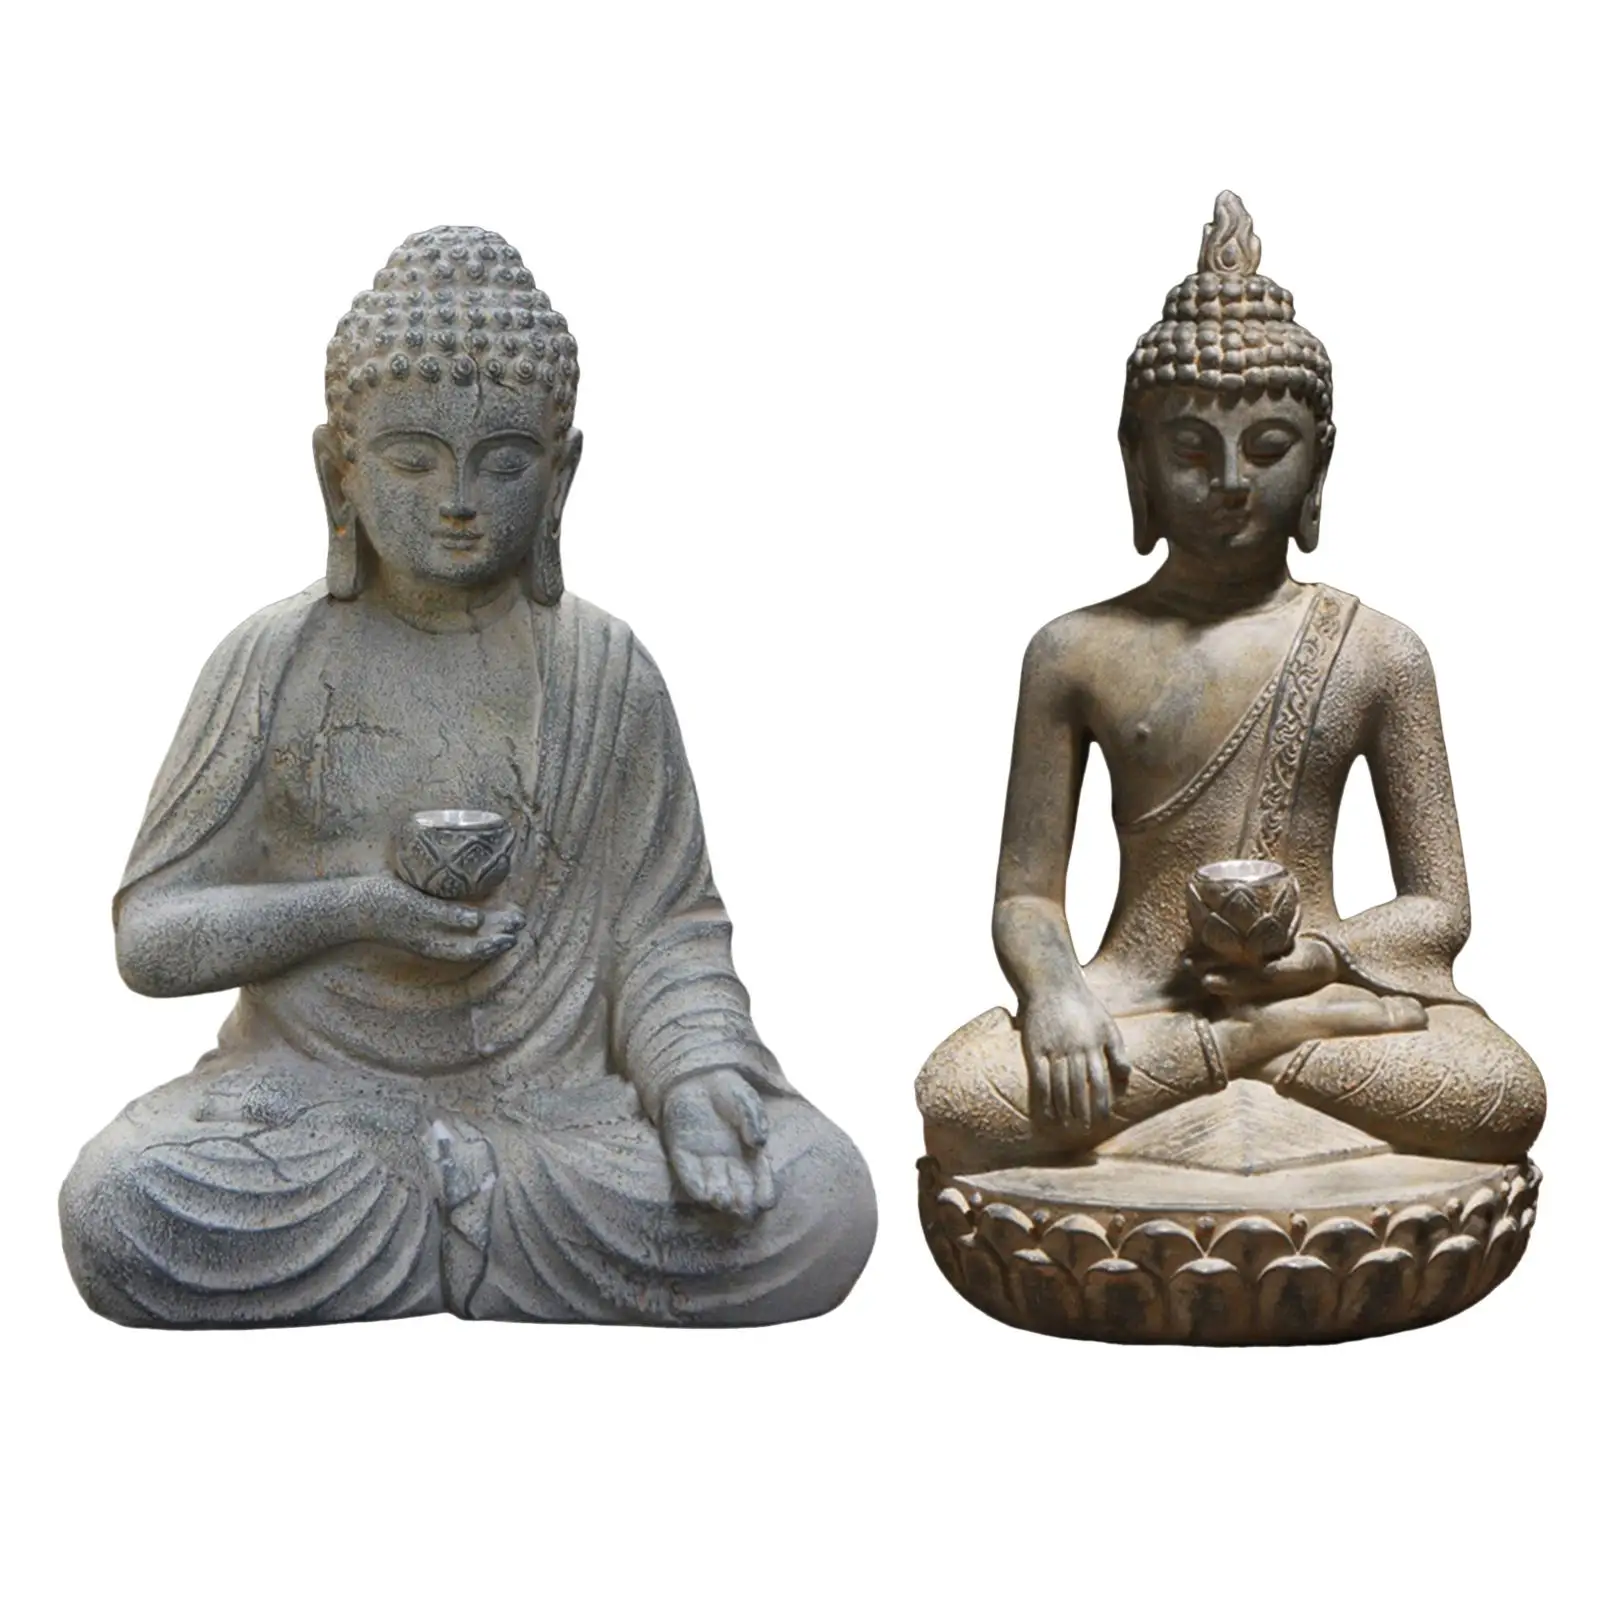 Resin Craft Buddha Statues Ornaments for Restaurants Courtyard Living Room